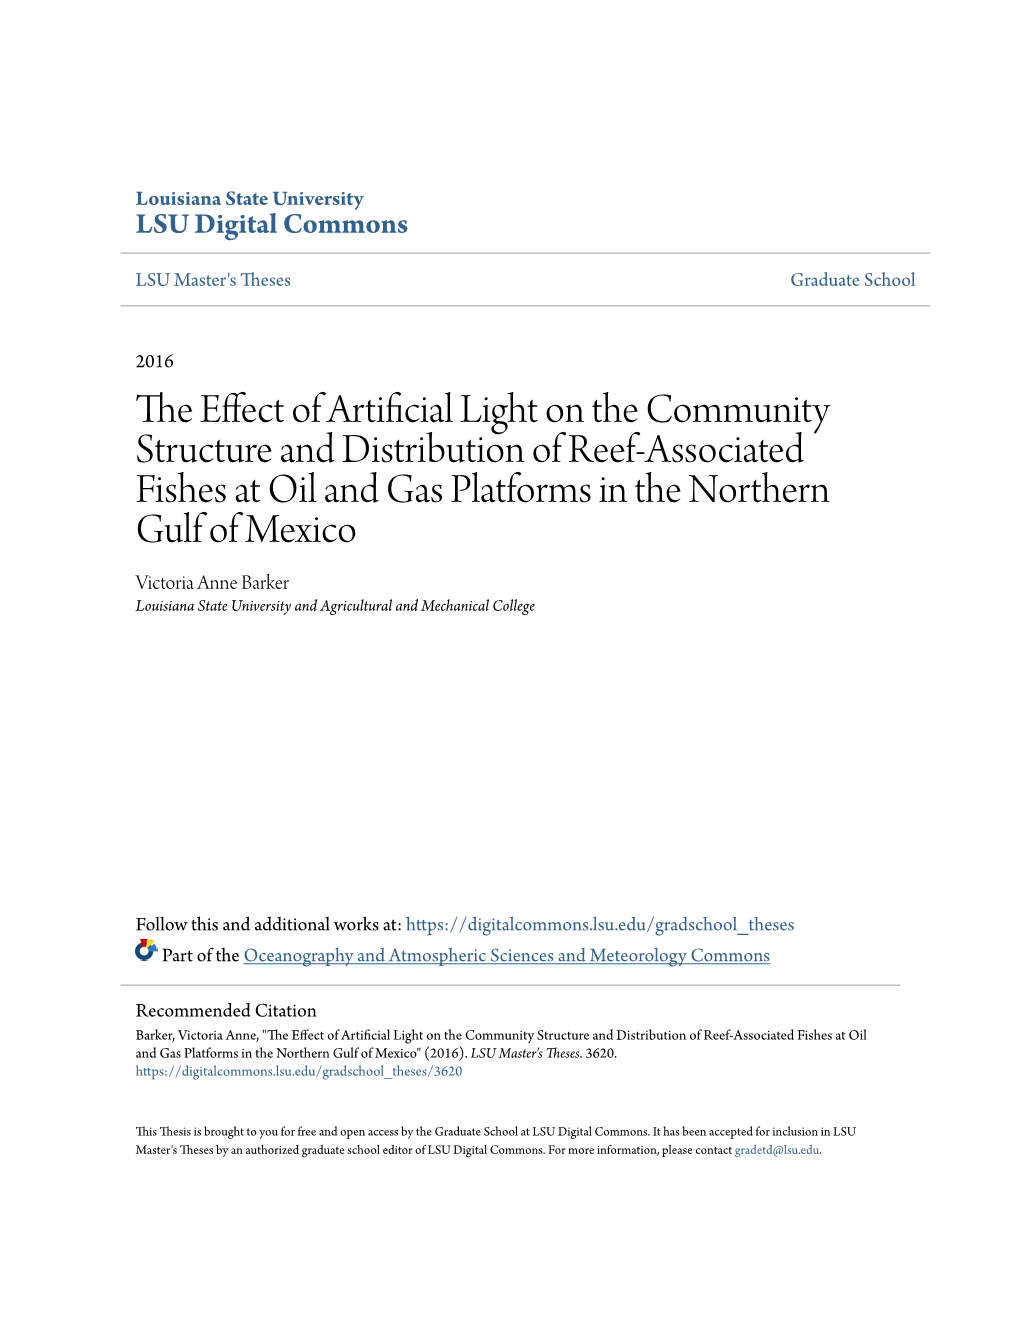 The Effect of Artificial Light on the Community Structure and Distribution of Reef-Associated Fishes at Oil and Gas Platforms in the Northern Gulf of Mexico" (2016)